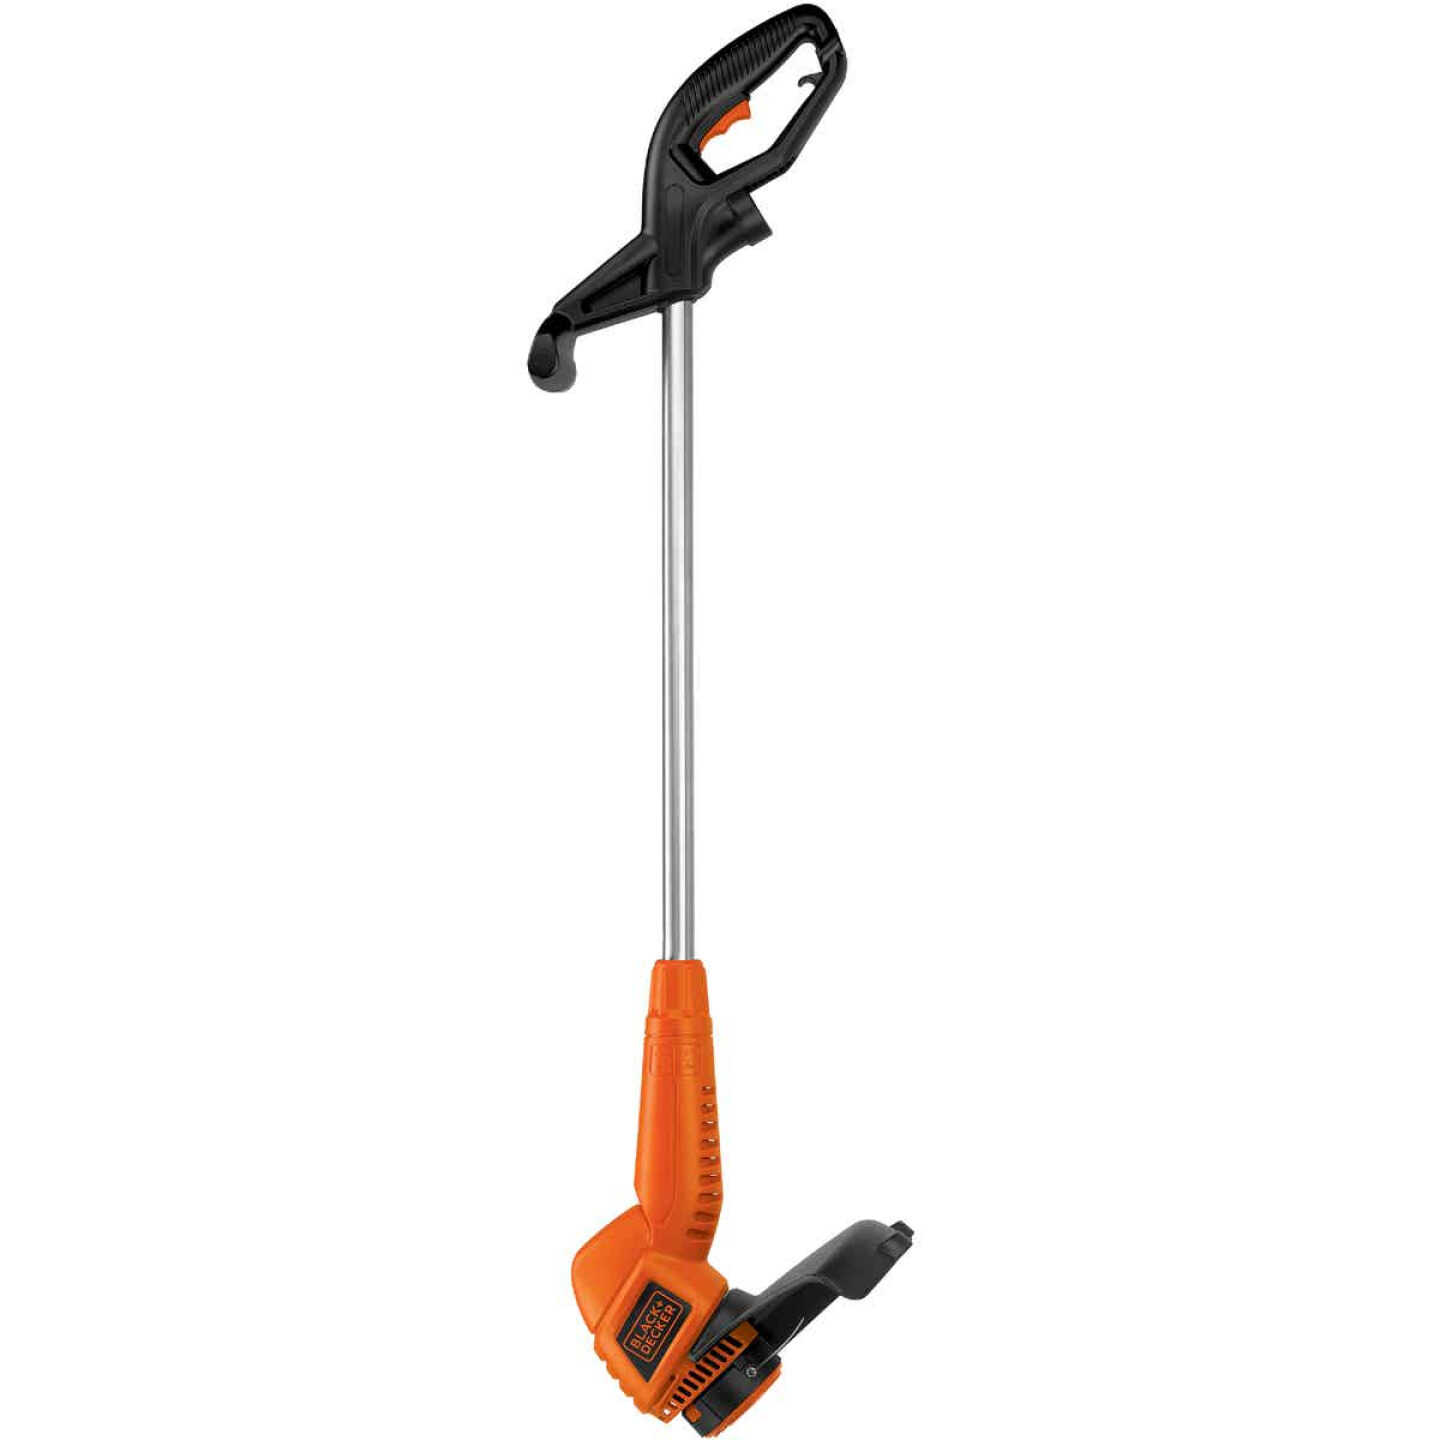 BLACK+DECKER 13 in. 4.0 Amp Corded Electric Straight Shaft Single